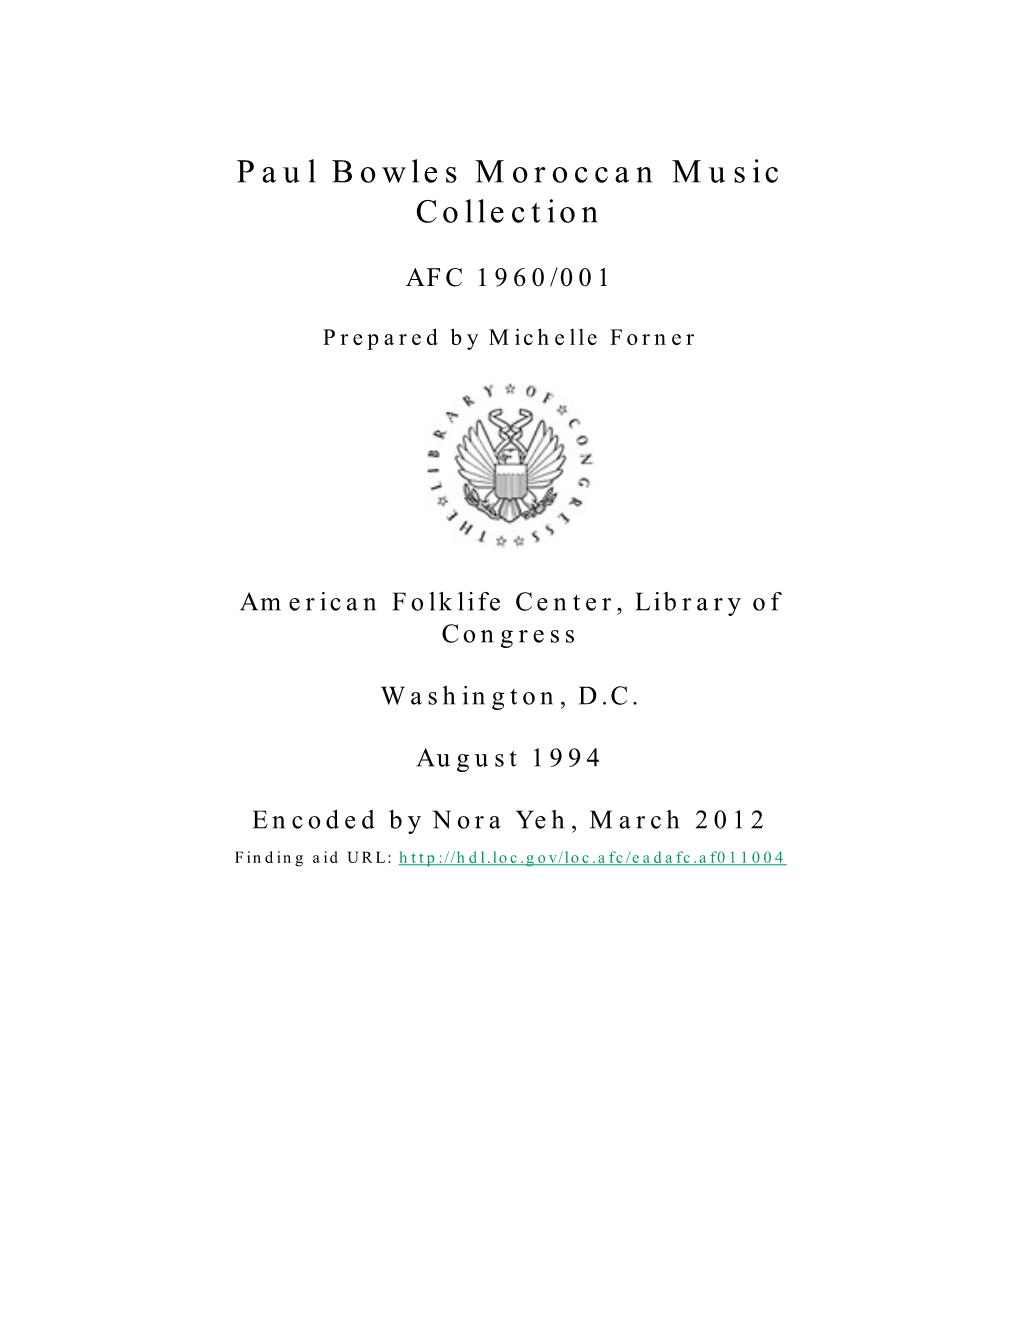 Paul Bowles Moroccan Music Collection